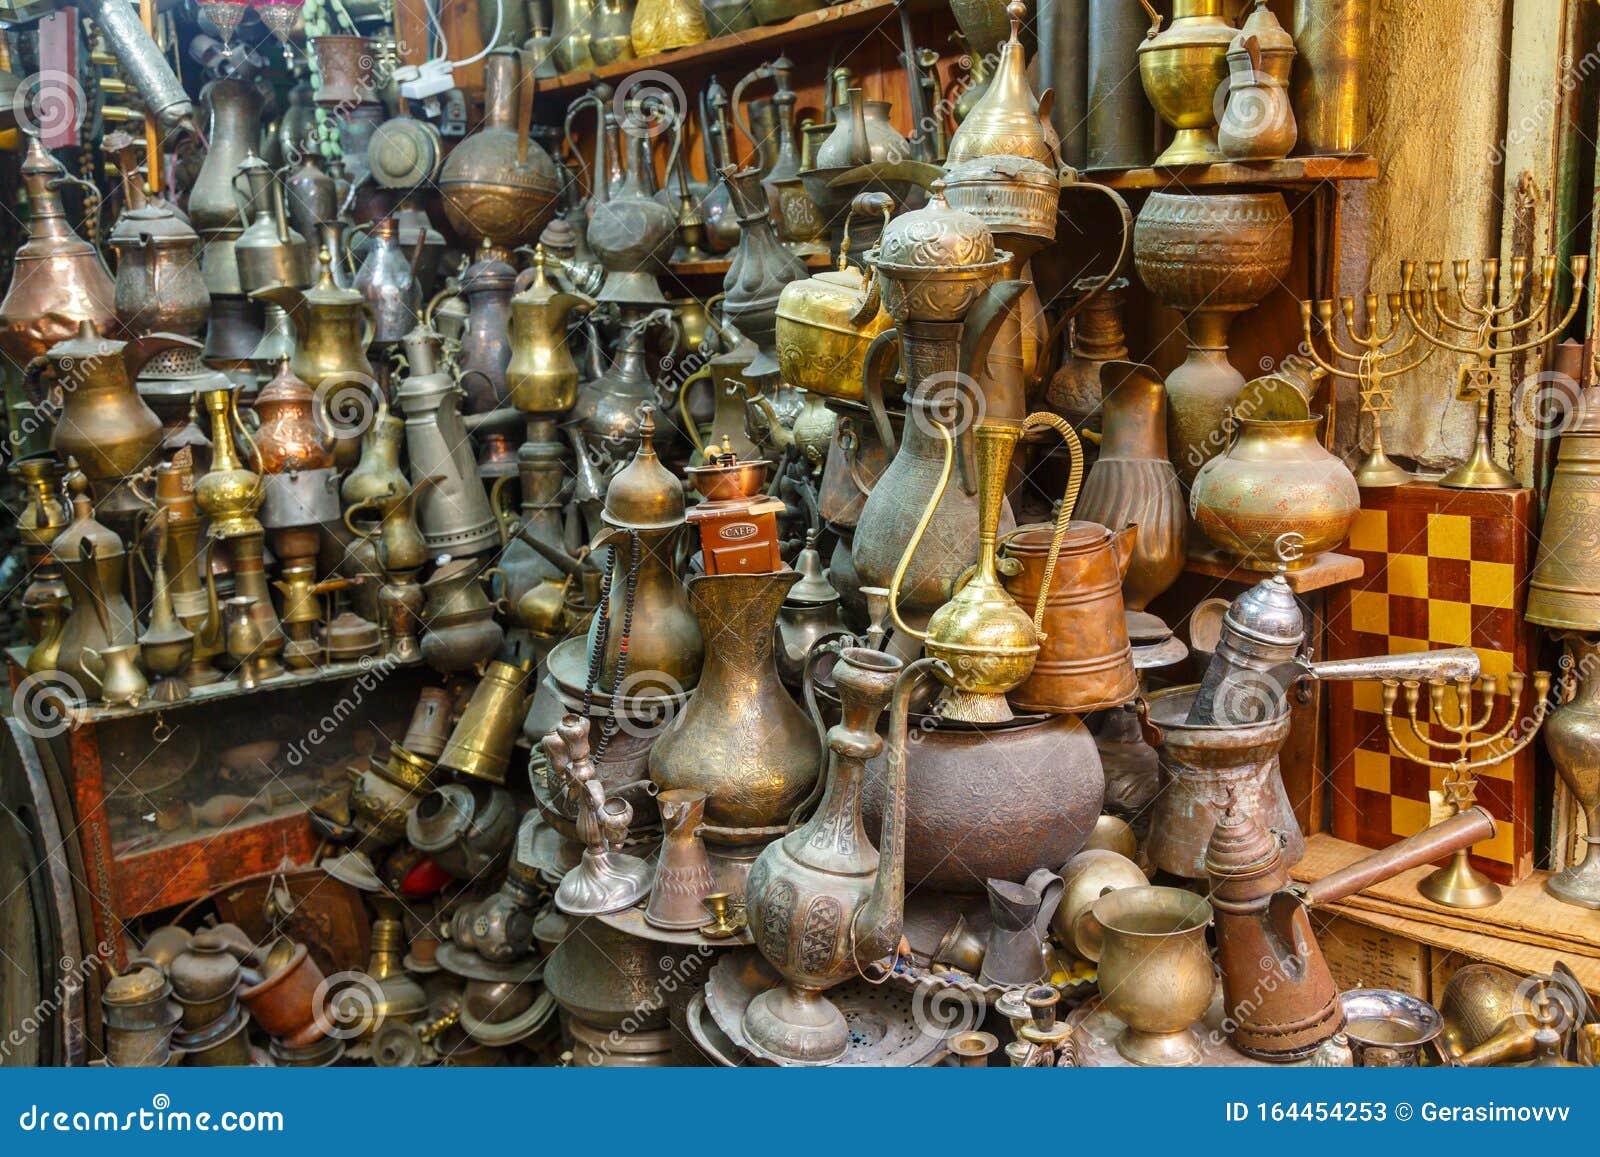 Vintage Metallic and Copper Stuff Sold on a Market in Jerusalem Old City,  Israel Stock Image - Image of object, cookware: 164454253